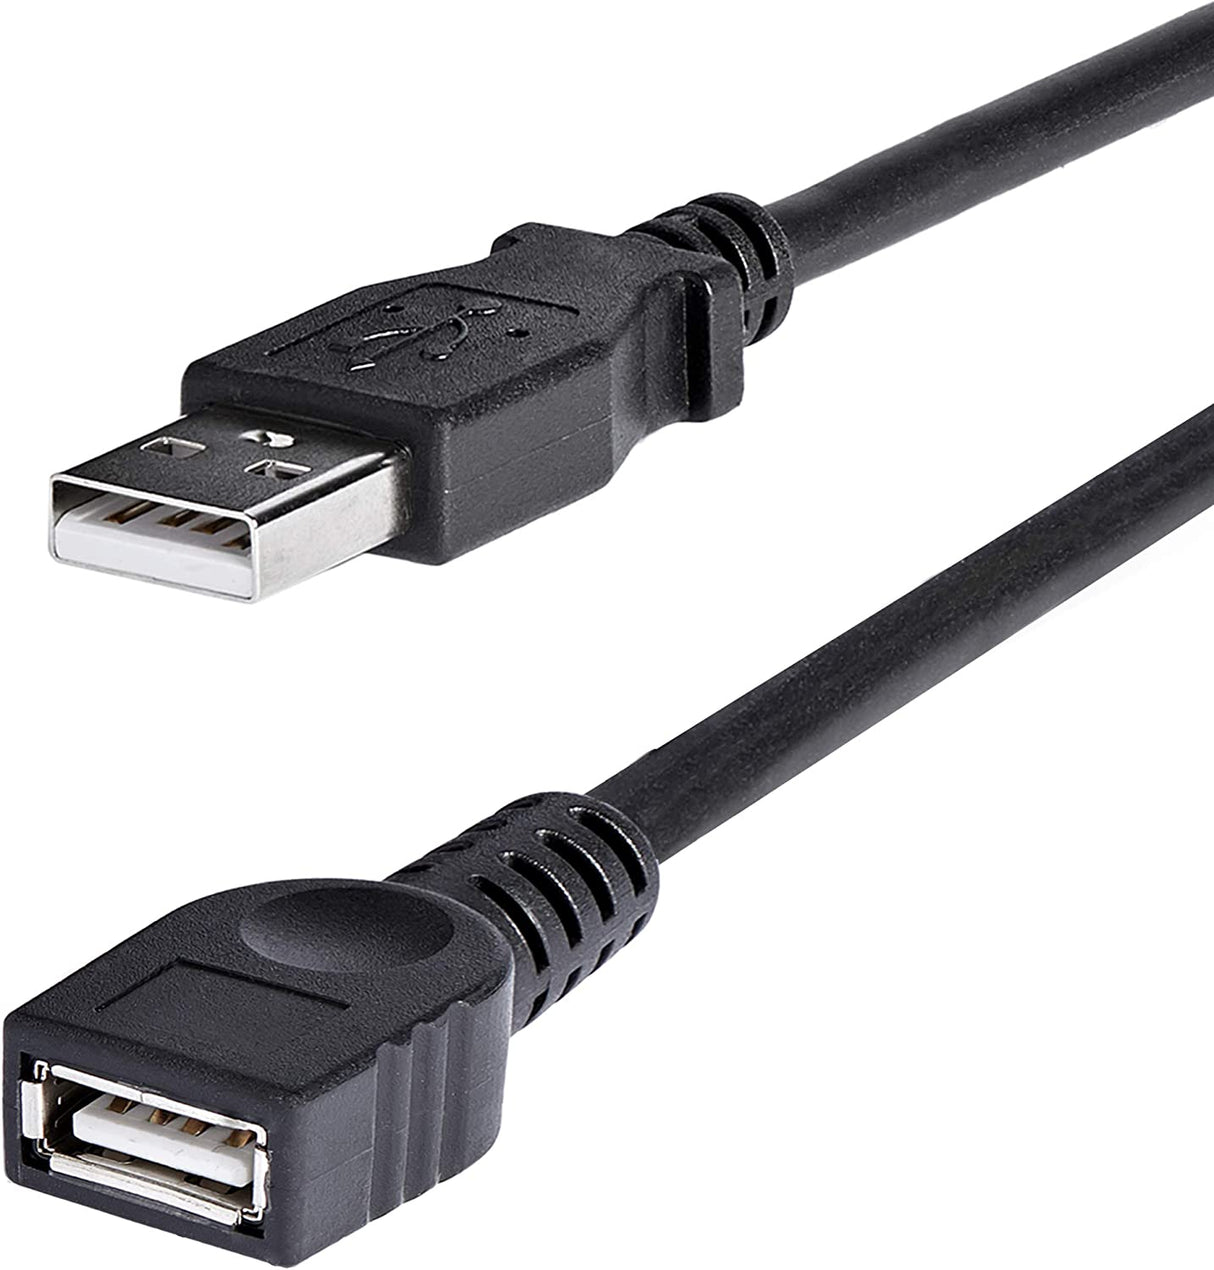 StarTech.com 6 ft Black USB 2.0 Extension Cable A to A - M/F - USB extension cable - USB (M) to USB (F) - USB 2.0 - 6 ft - black - USBEXTAA6BK Black 6ft